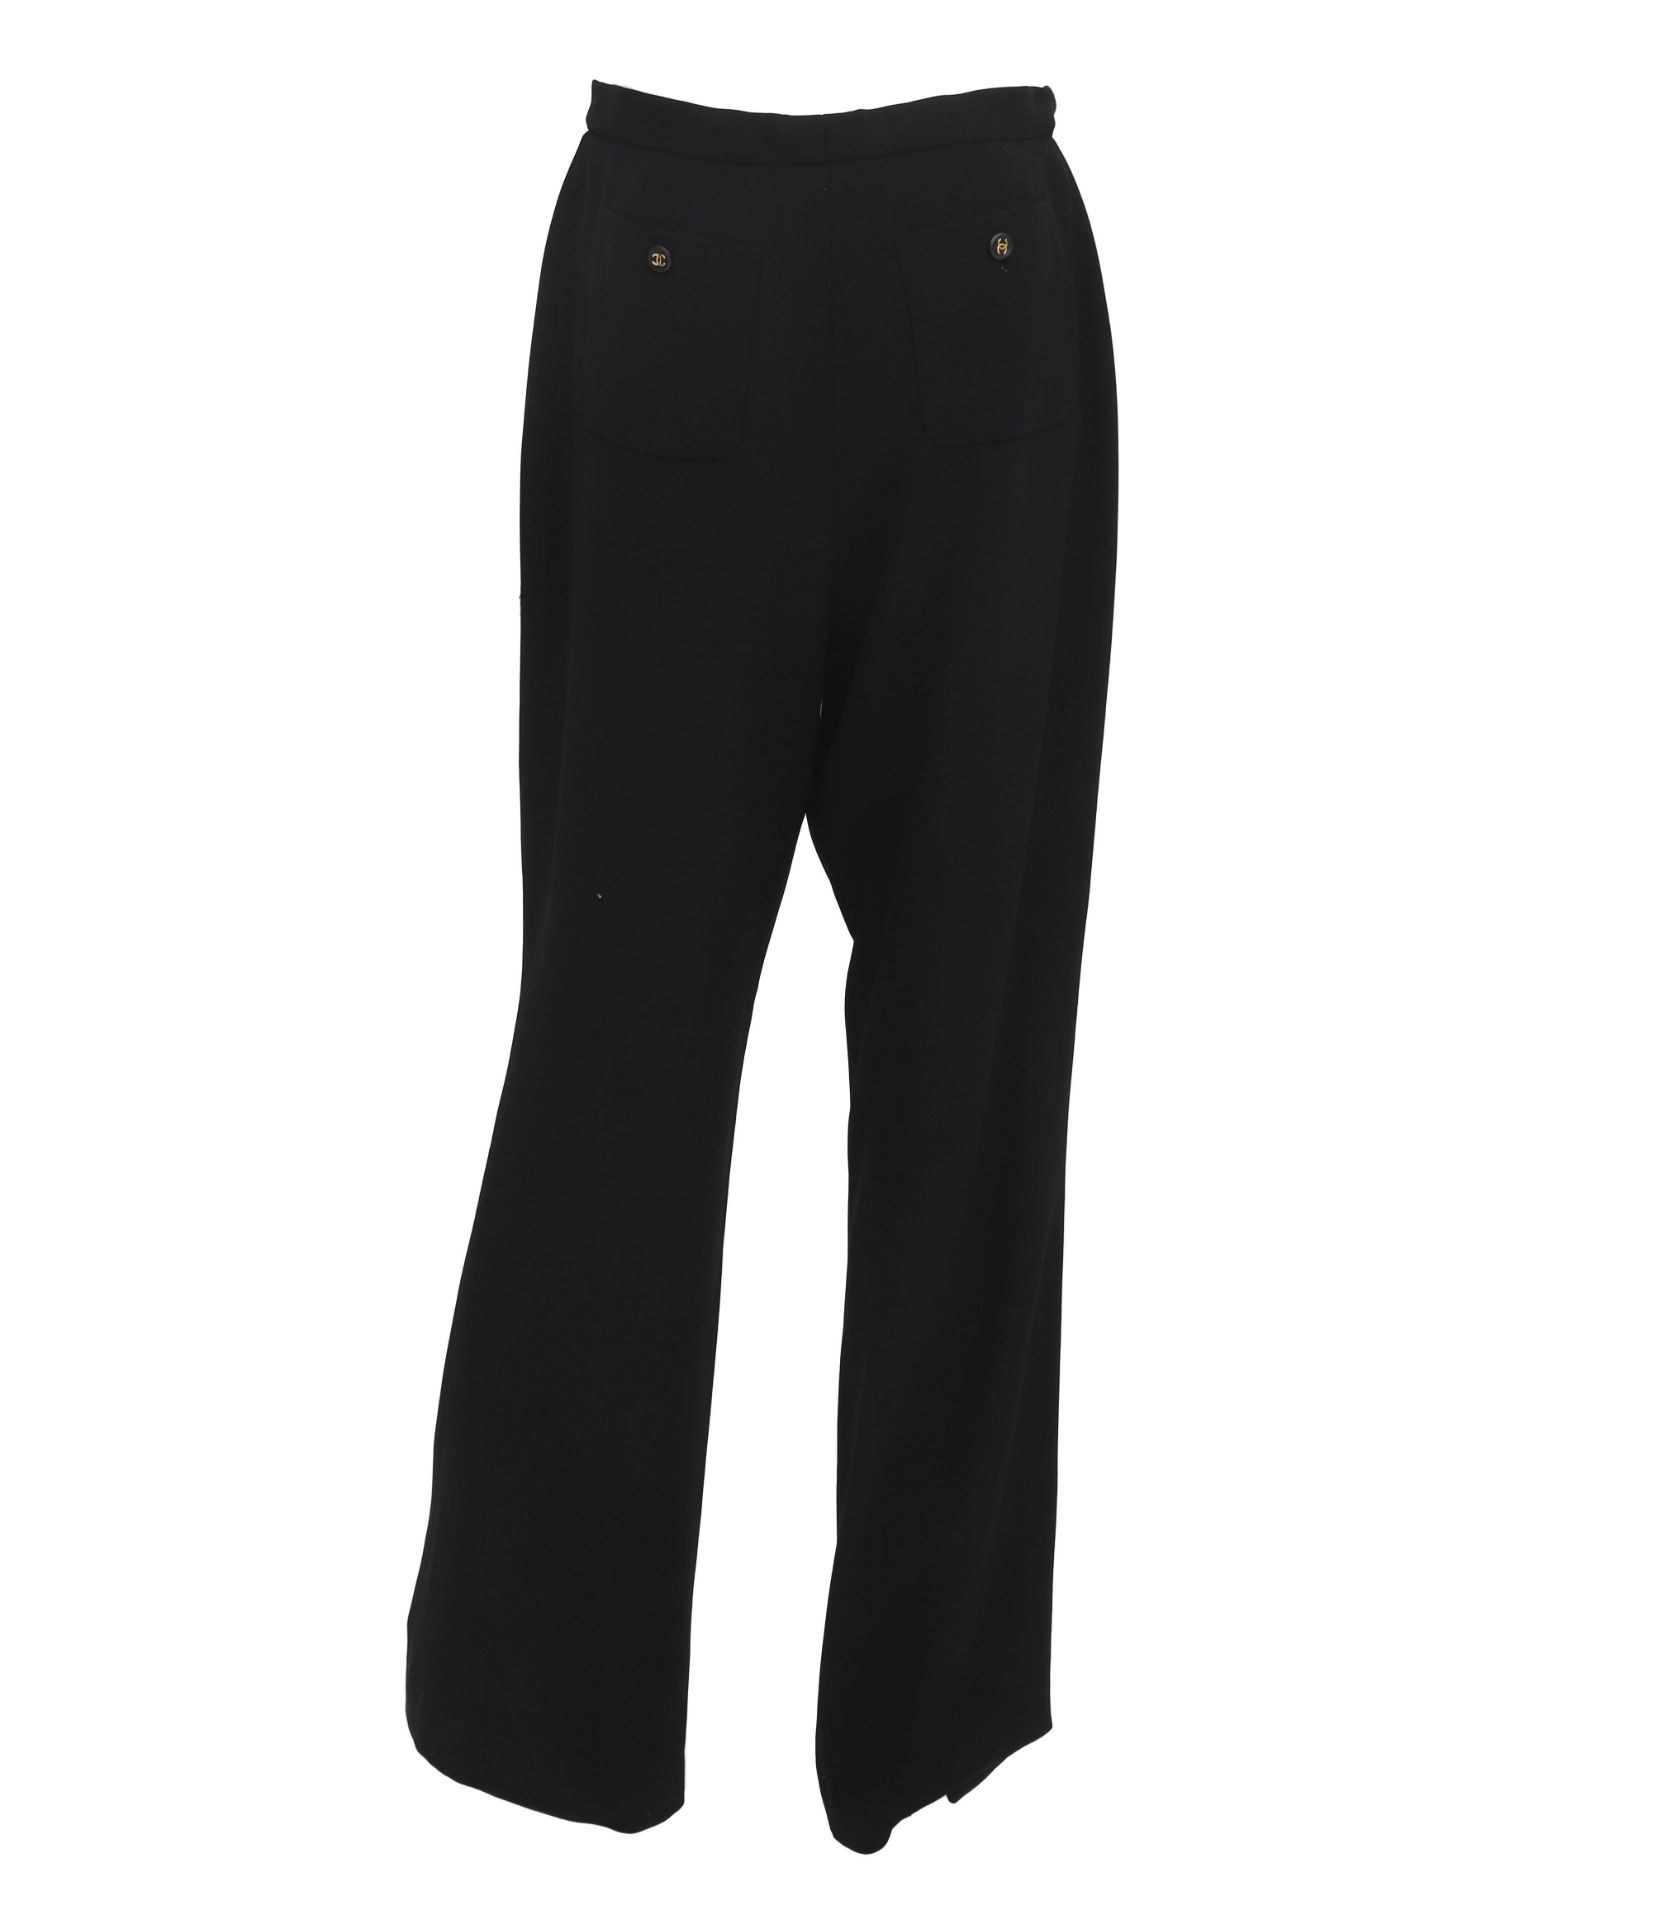 Chanel Boutique black trousers with CC logo buttons. The trousers have two pockets on the front. - Bild 4 aus 6